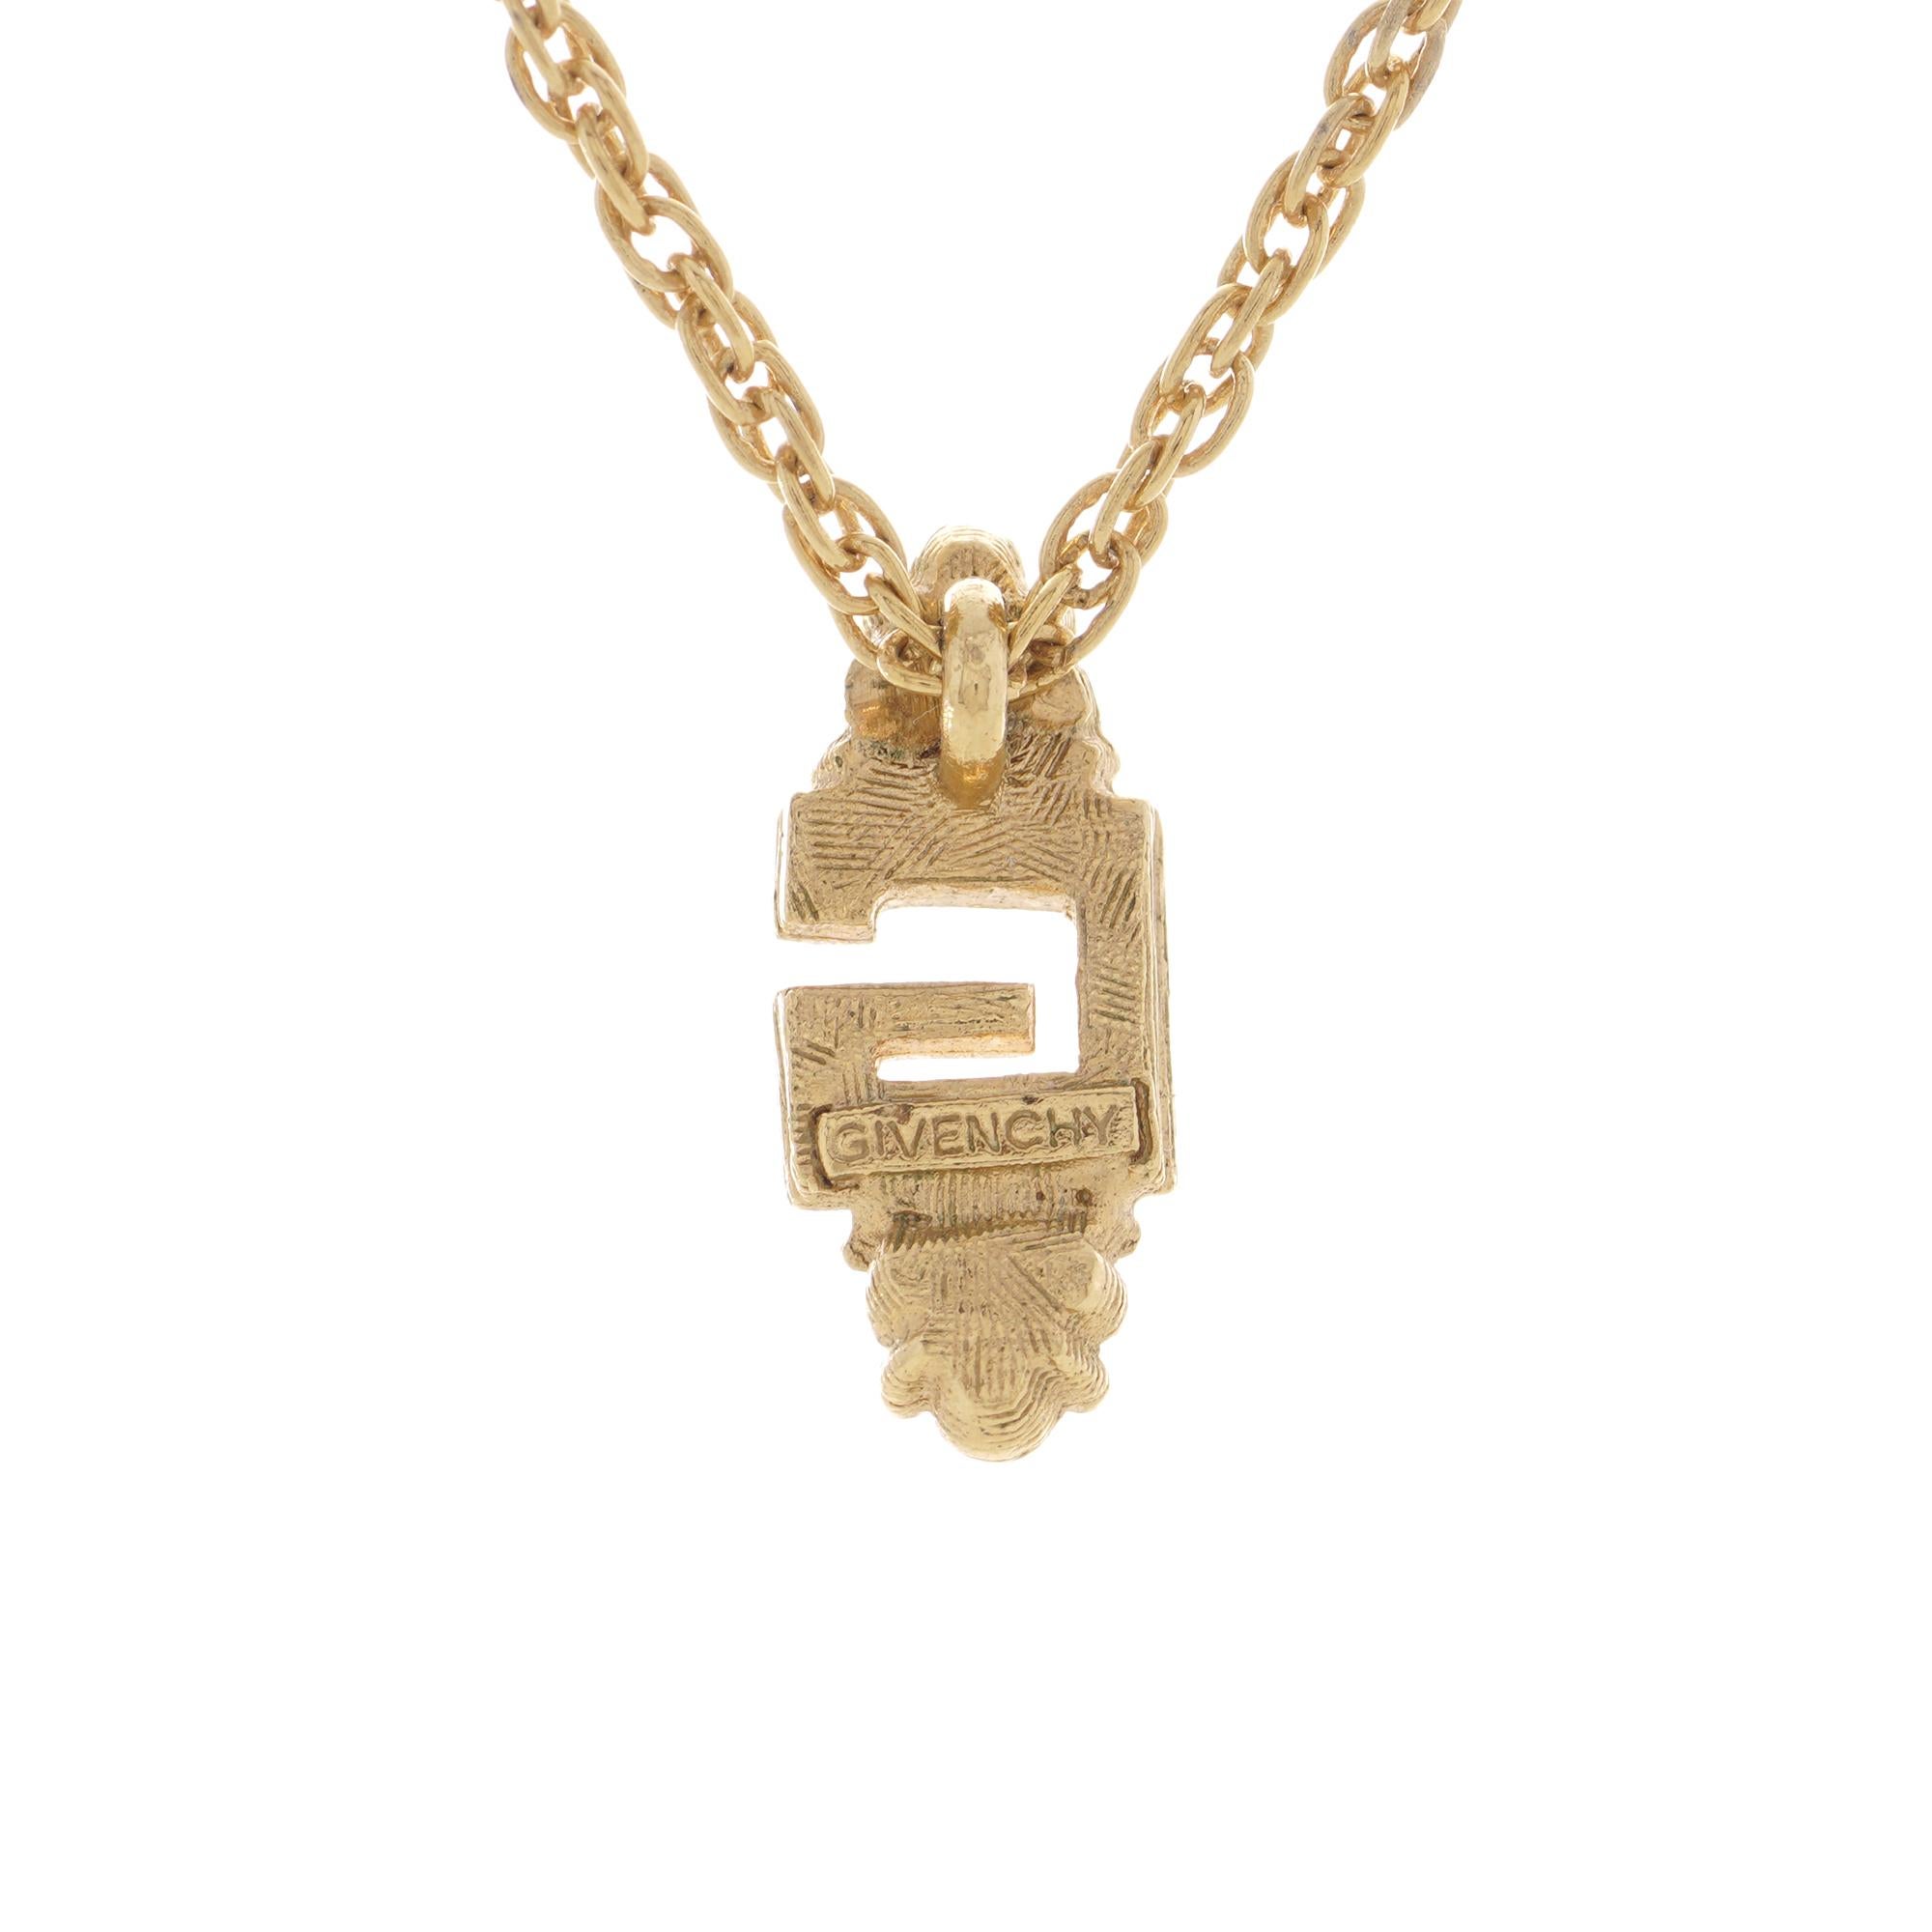 Vintage Givenchy thick chain necklace with G letter pendant. 
Made in Circa 1990s 

Dimensions:
Weight: 3.4 grams
Length: 40.2 cm

Condition: Pre-owned, very good condition overall. 
